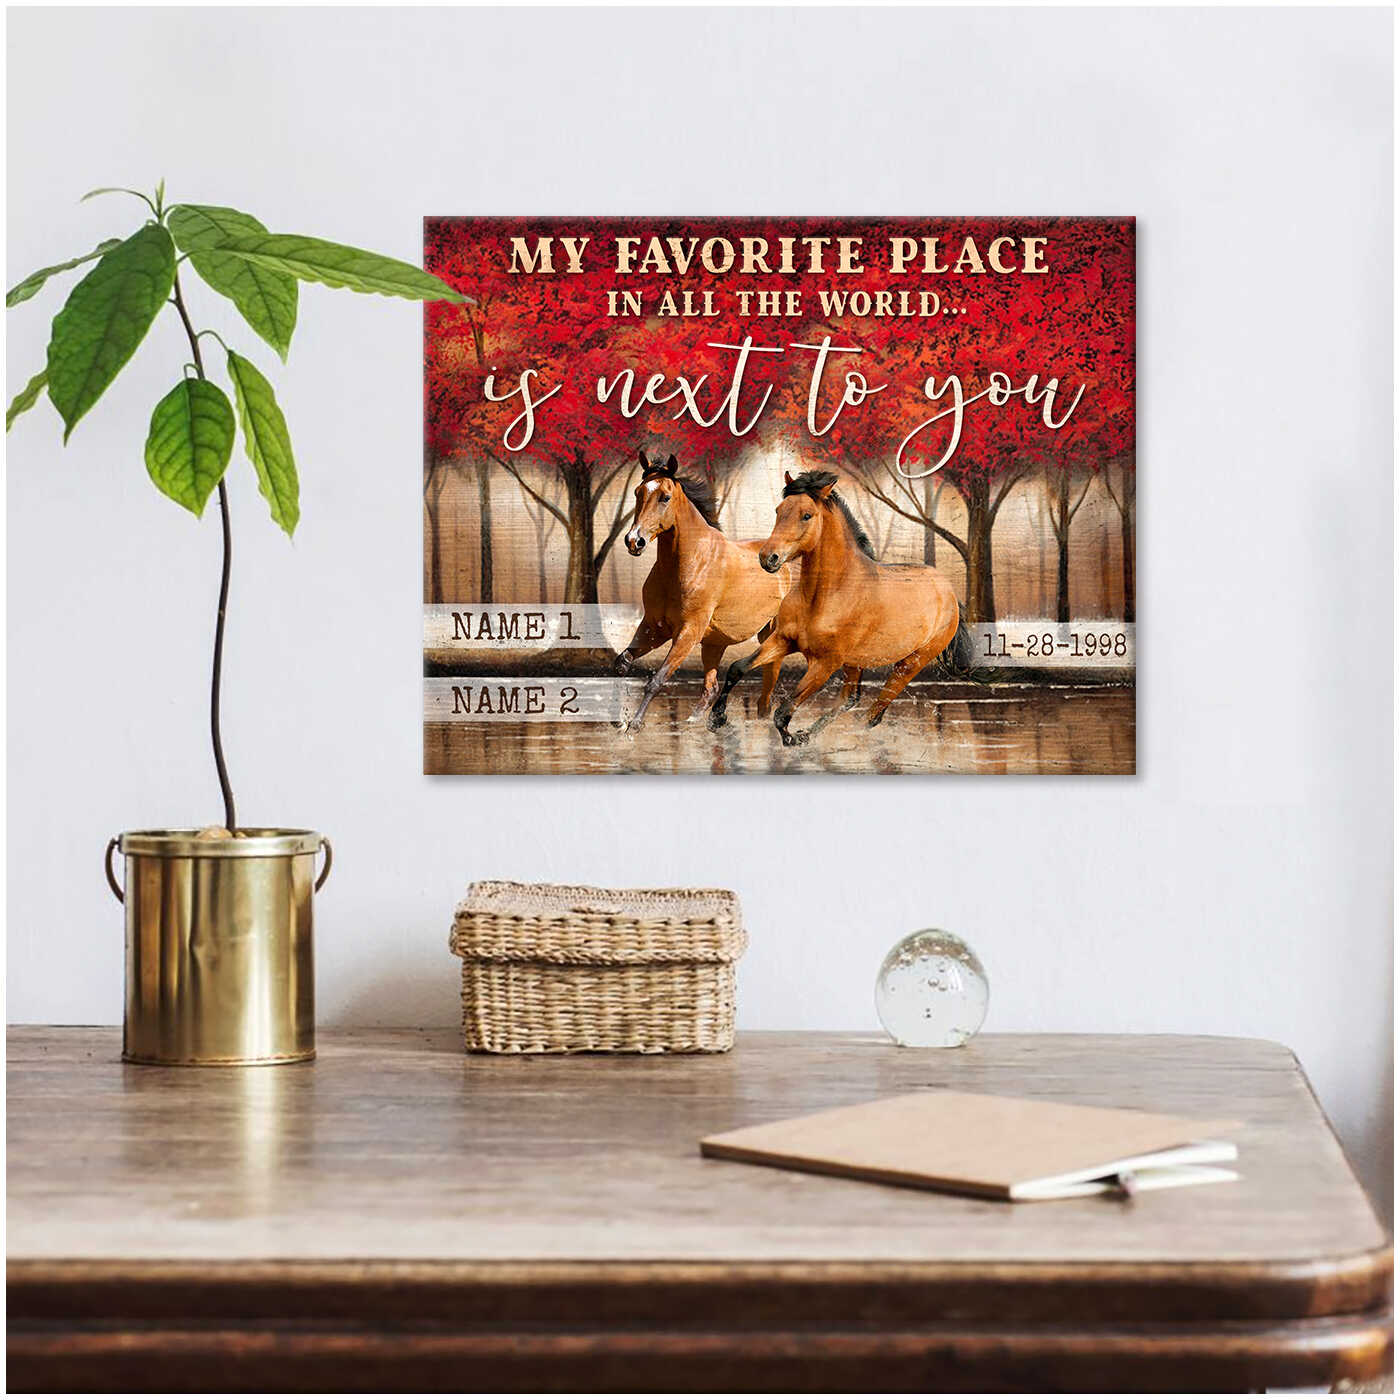 Parade Of Red Trees With Couple Of Horses My Favorite Place In All The World Is Next To You Farm Farmhouse Custom Name And Date Canvas Prints Wall Art Decor